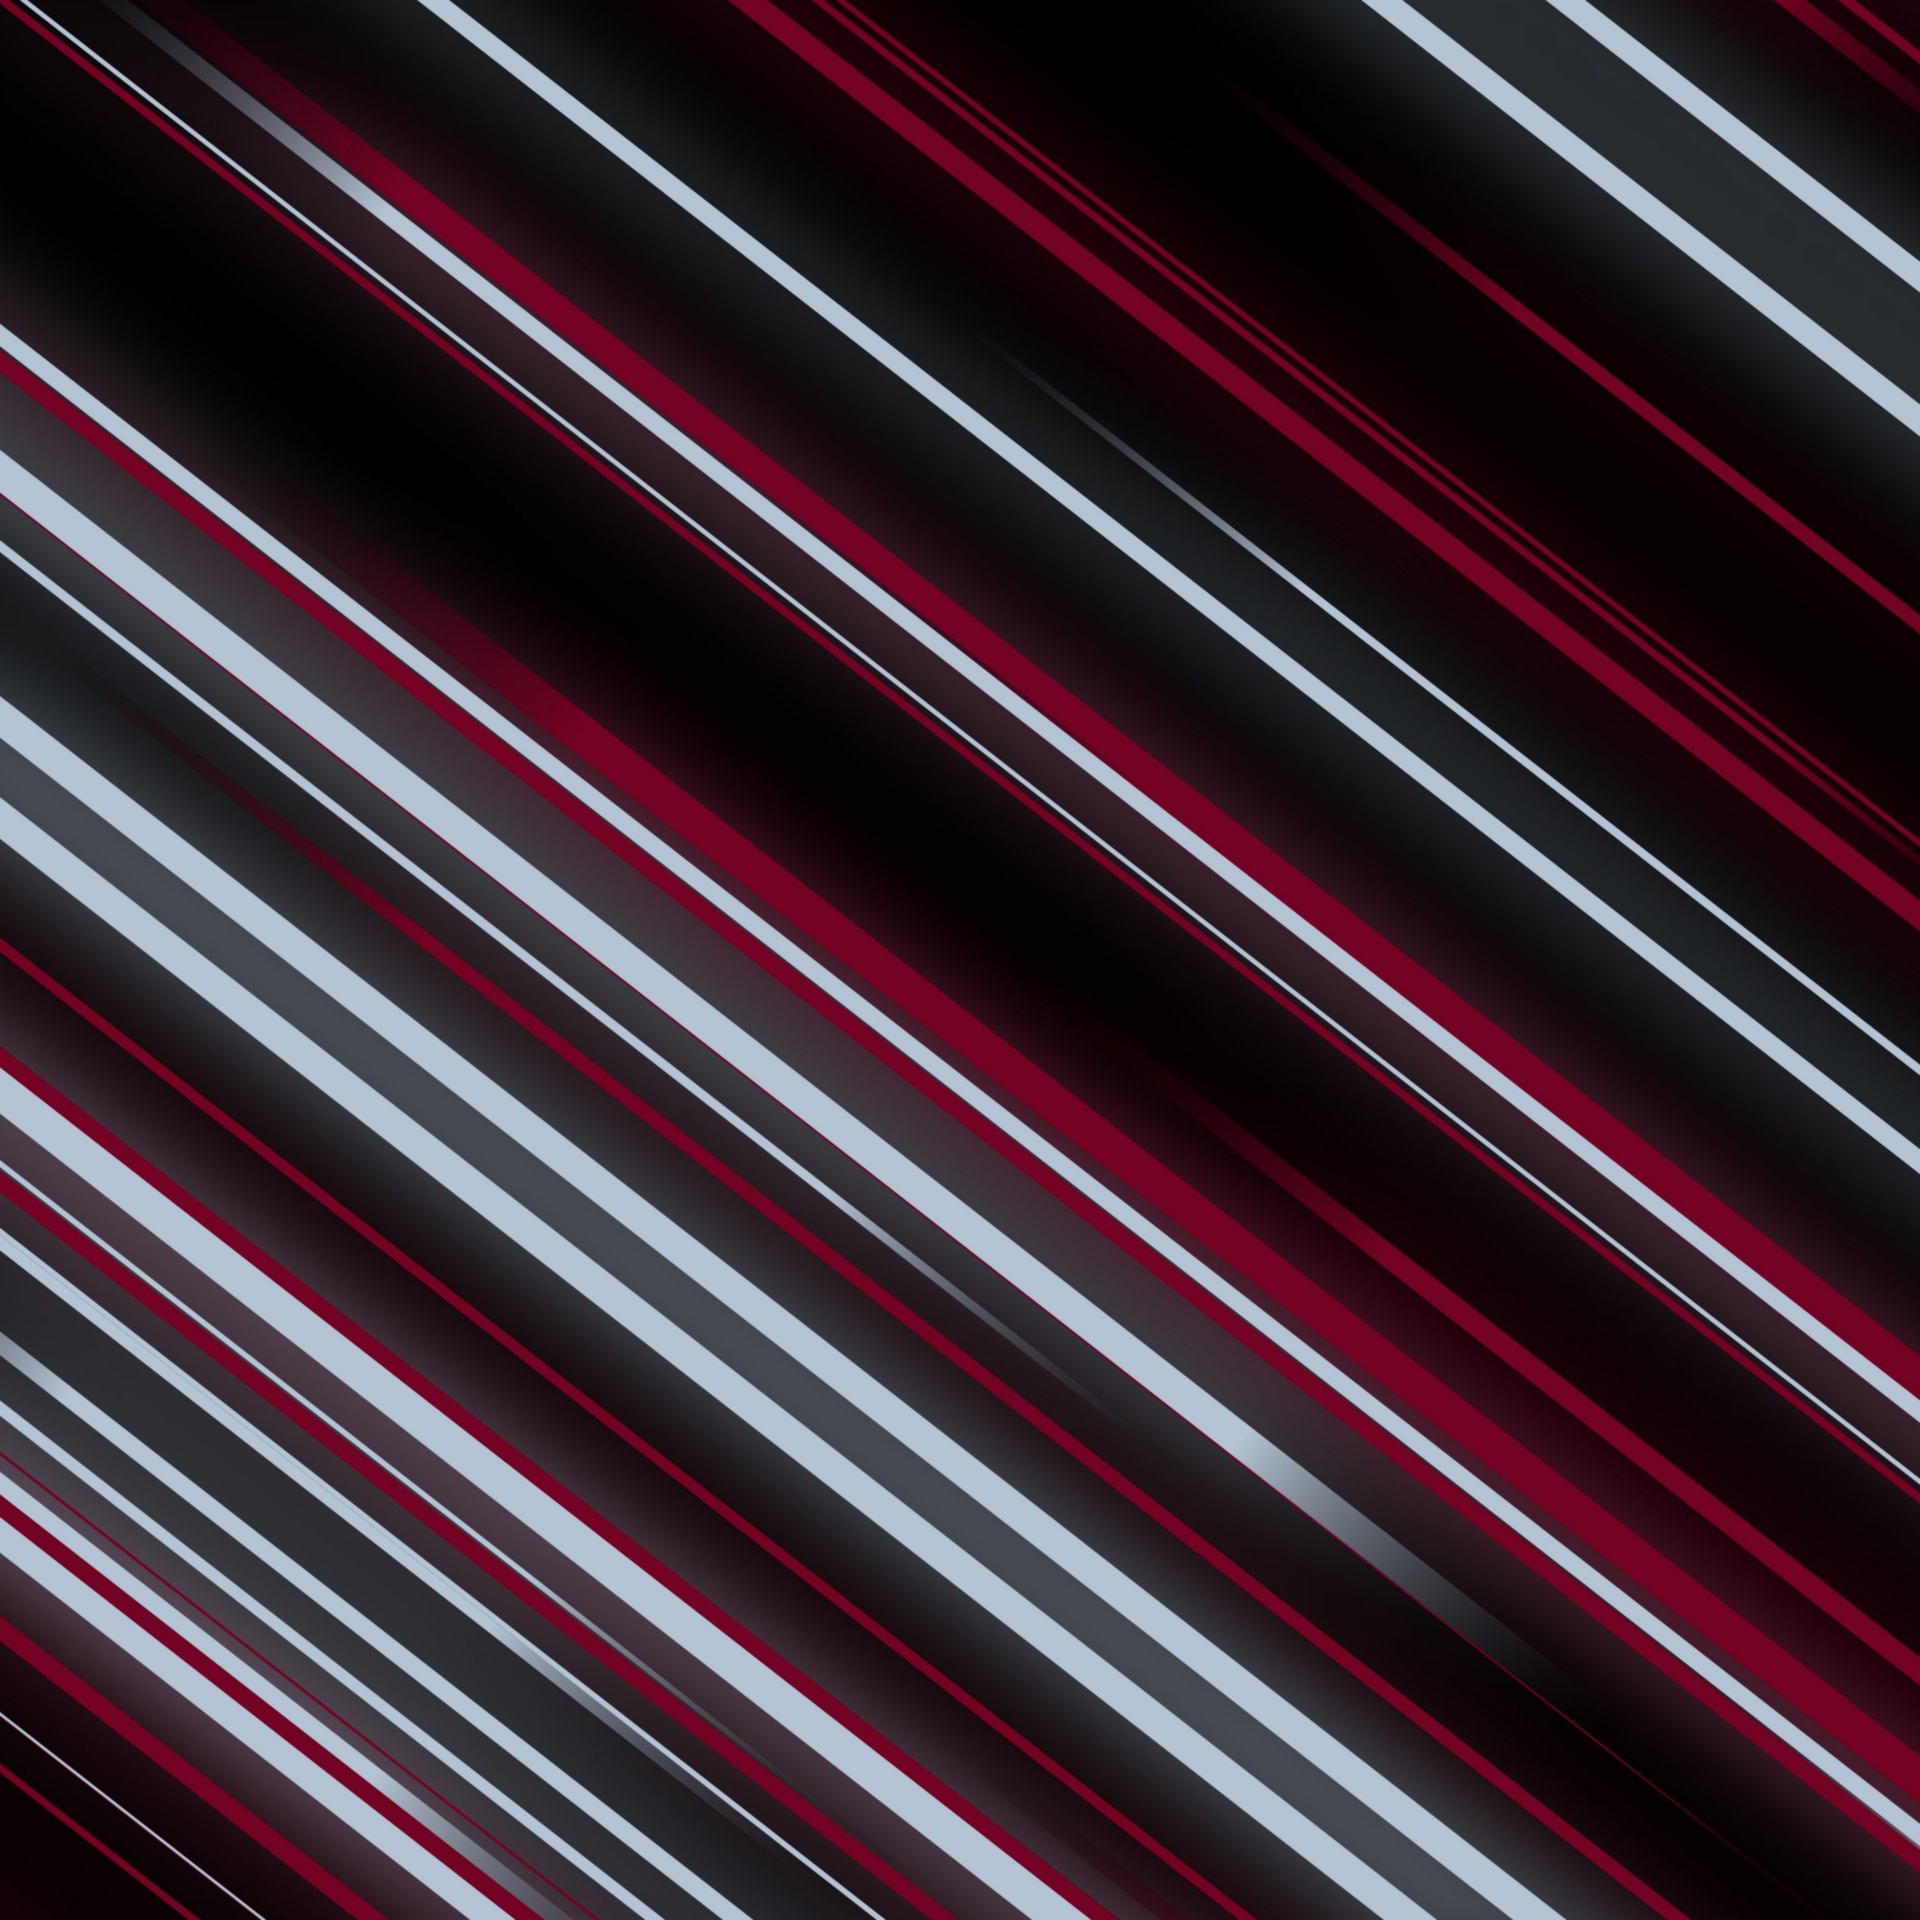 Free Red and Black Diagonal Stripes Background